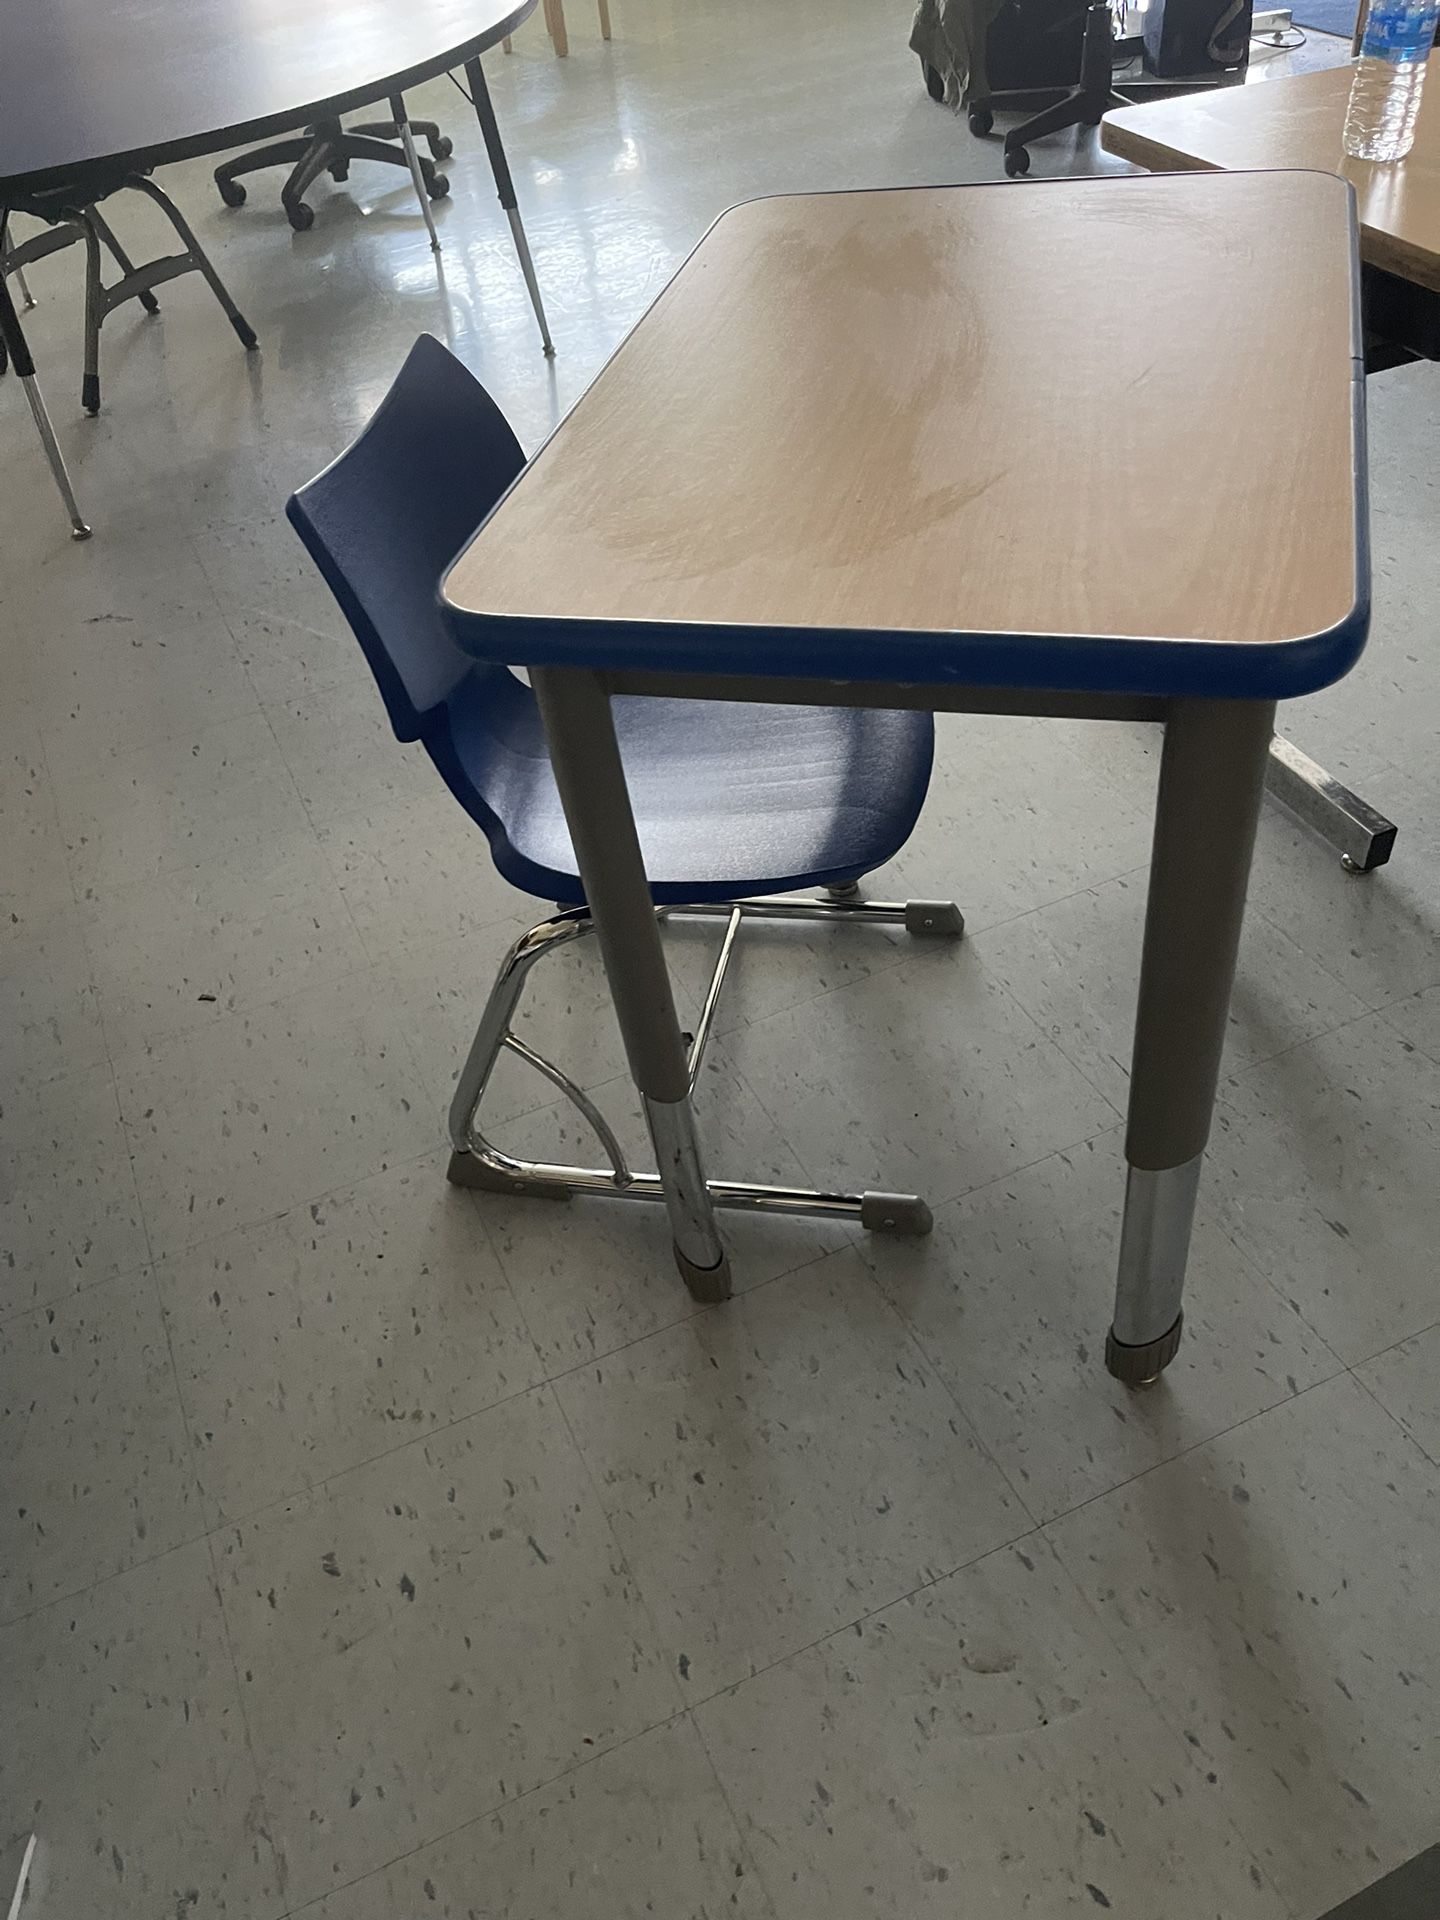 Classroom  Desk With A Chair 